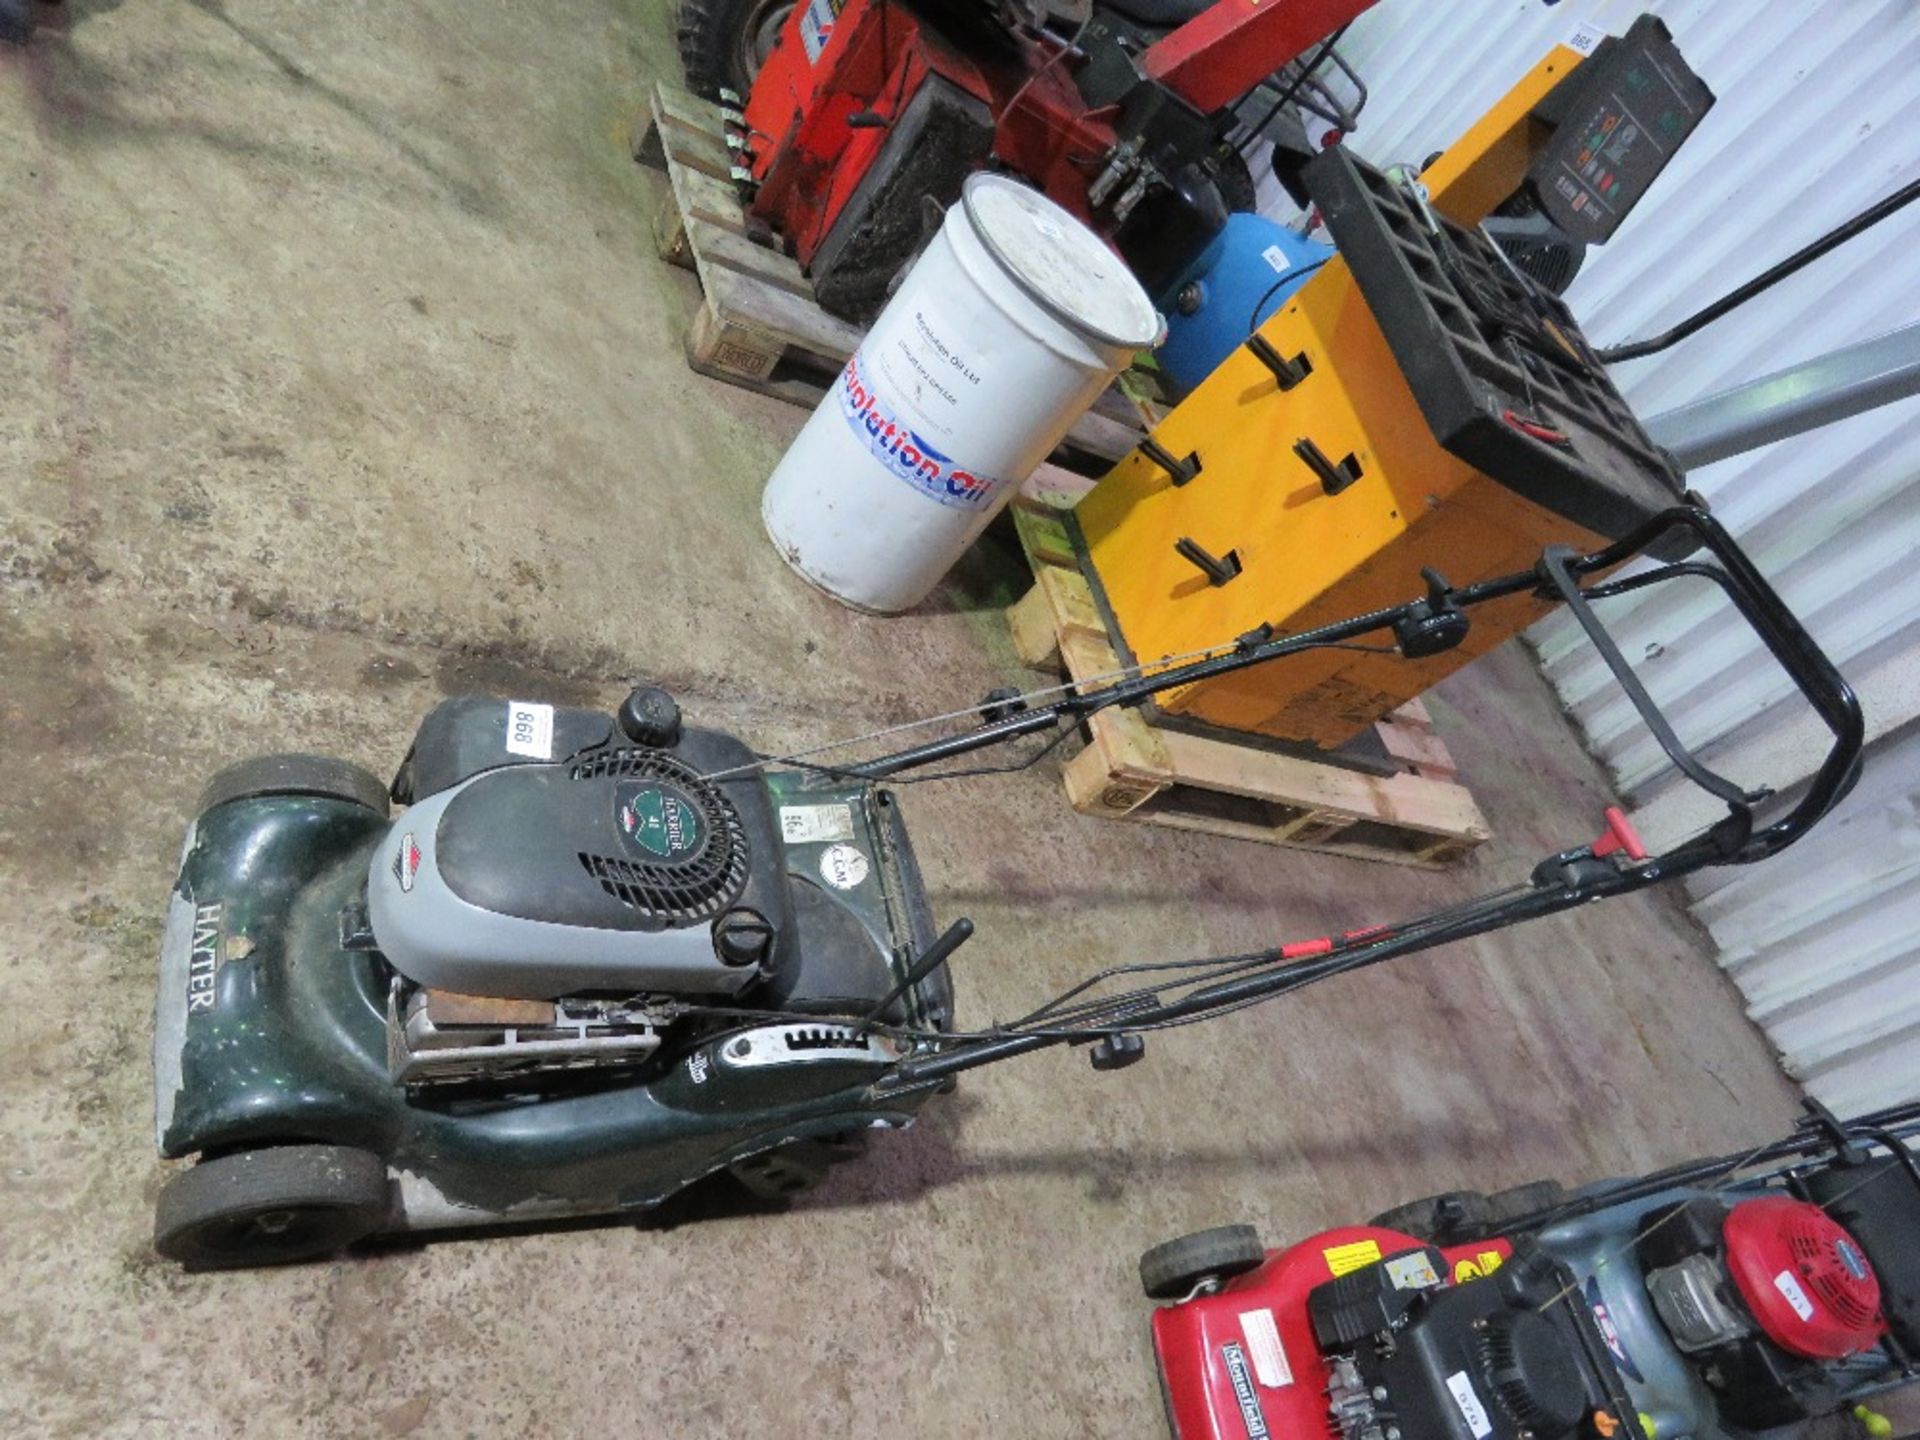 HAYTER HARRIER 41 ROLLER LAWN MOWER, NO COLLECTOR. THIS LOT IS SOLD UNDER THE AUCTIONEERS MARGIN